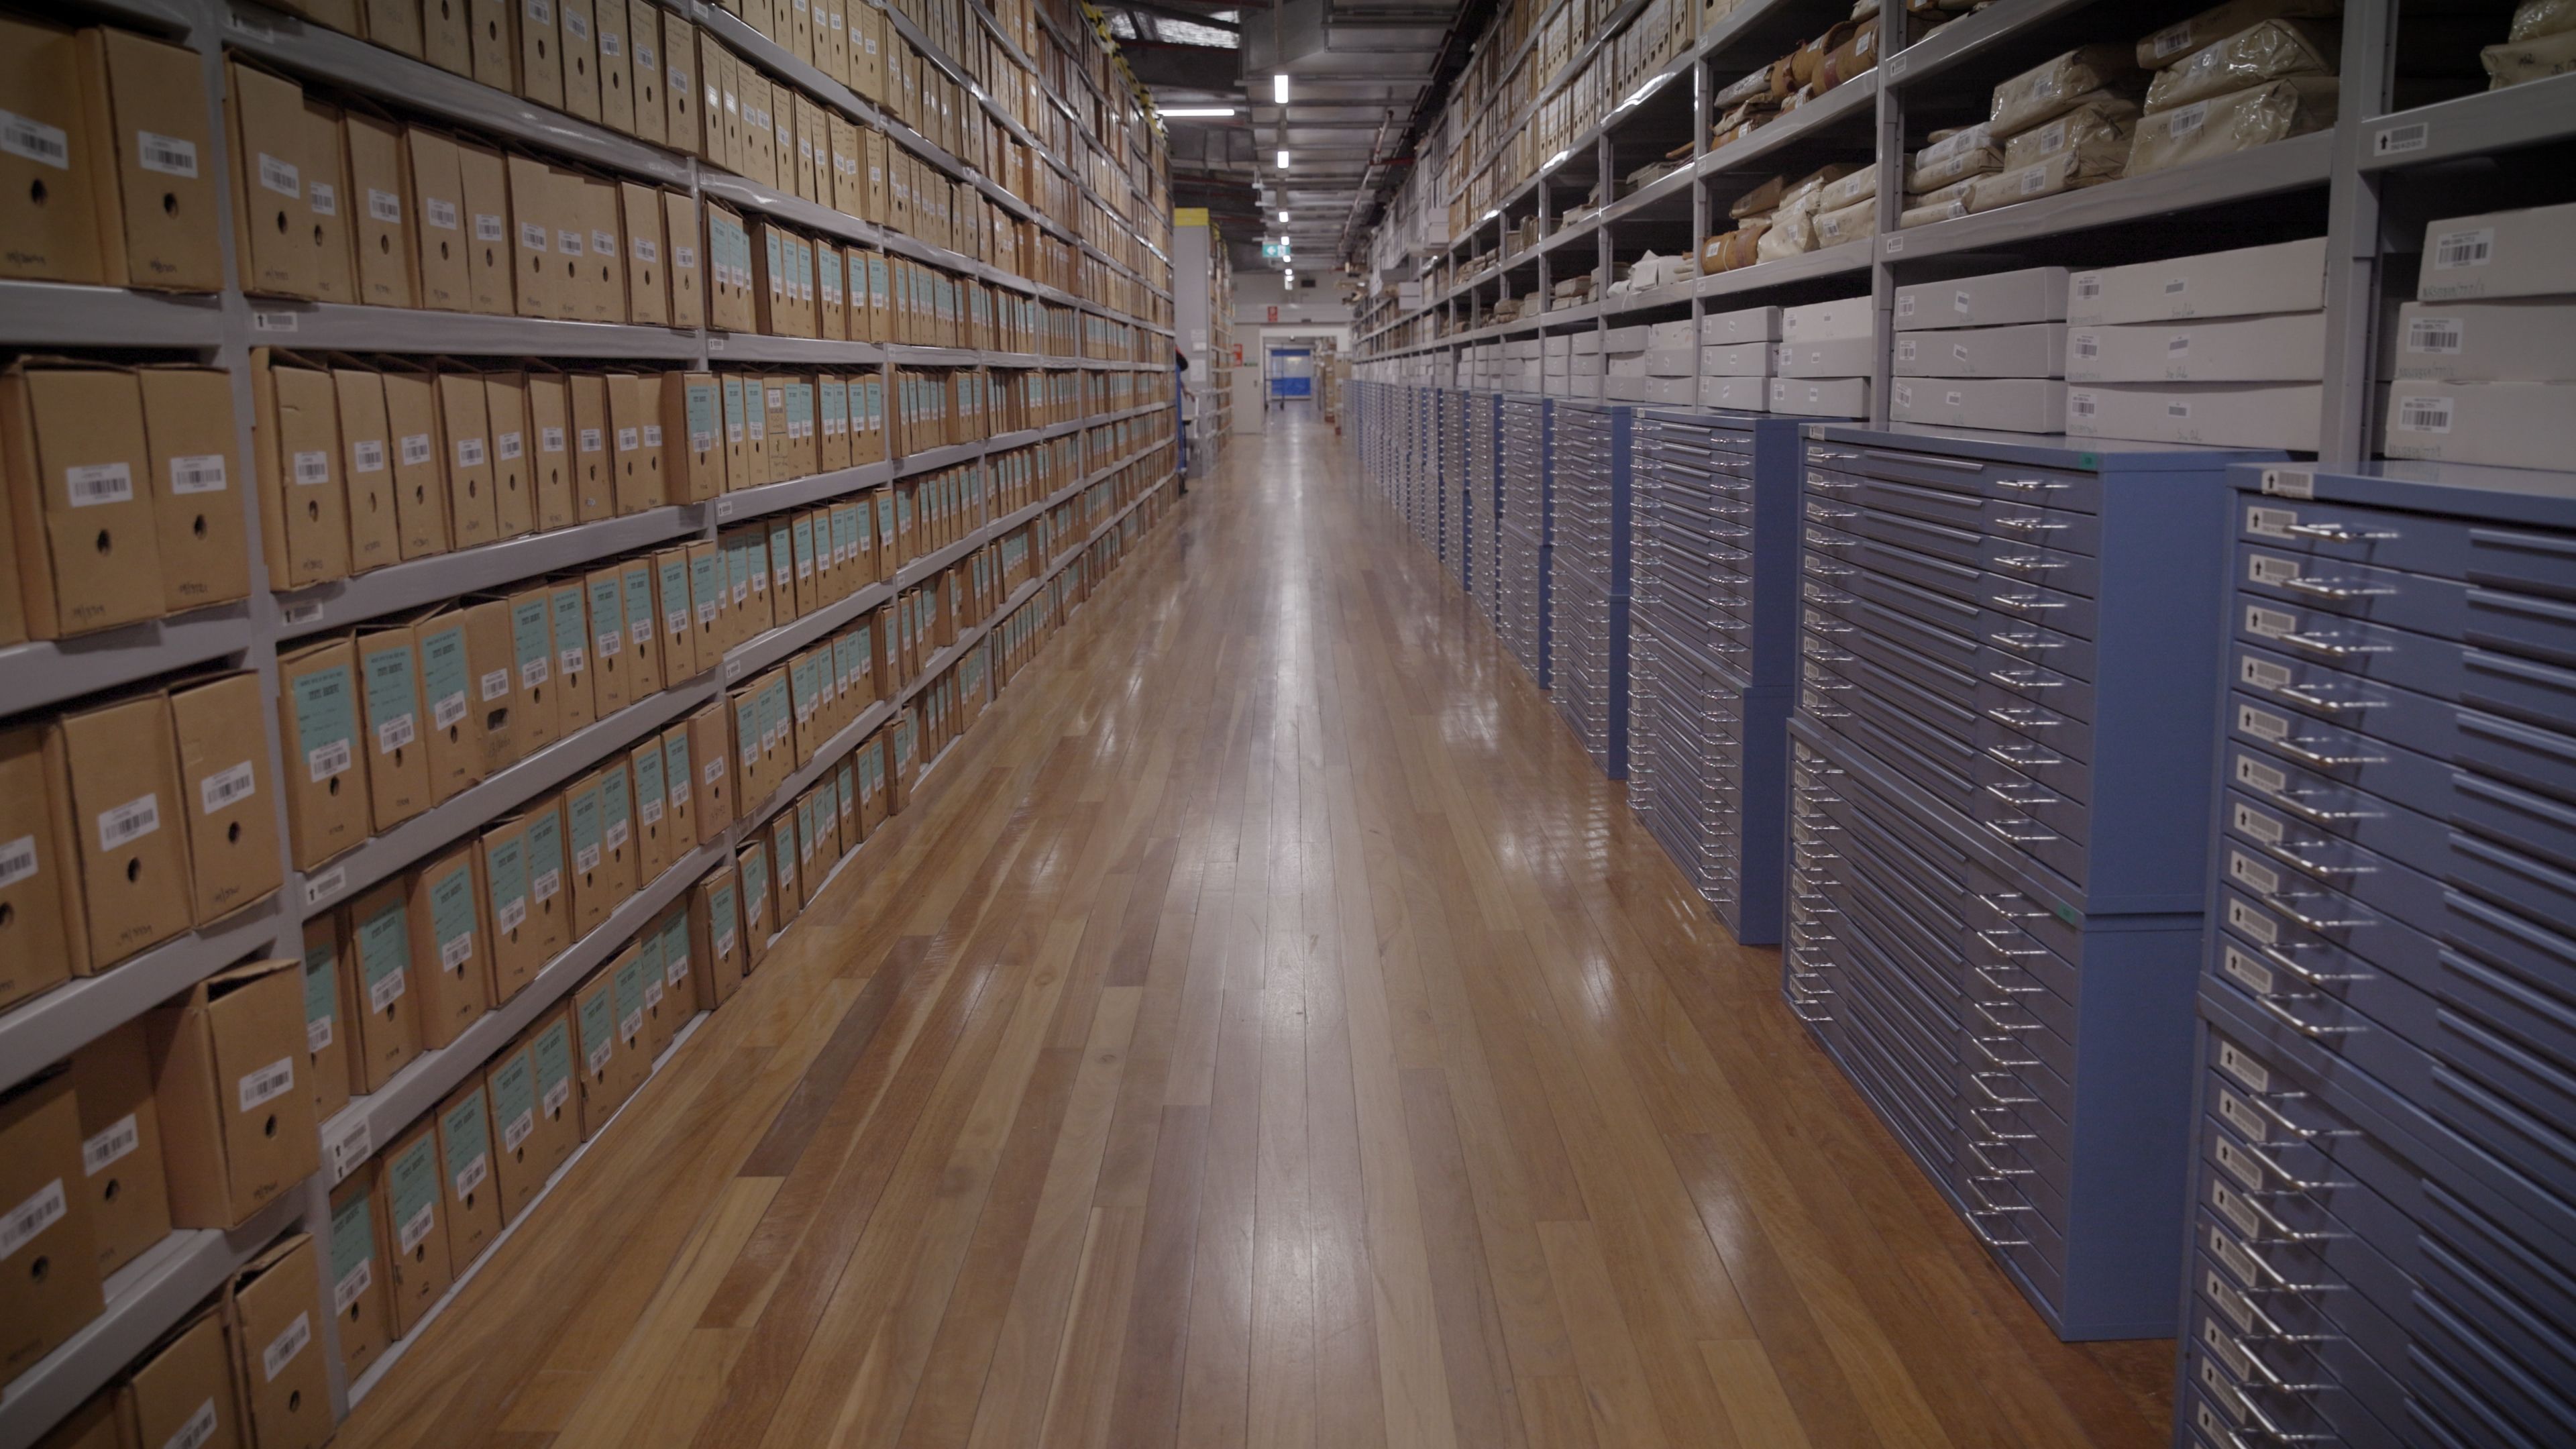 A photo looking down a long row of shelving